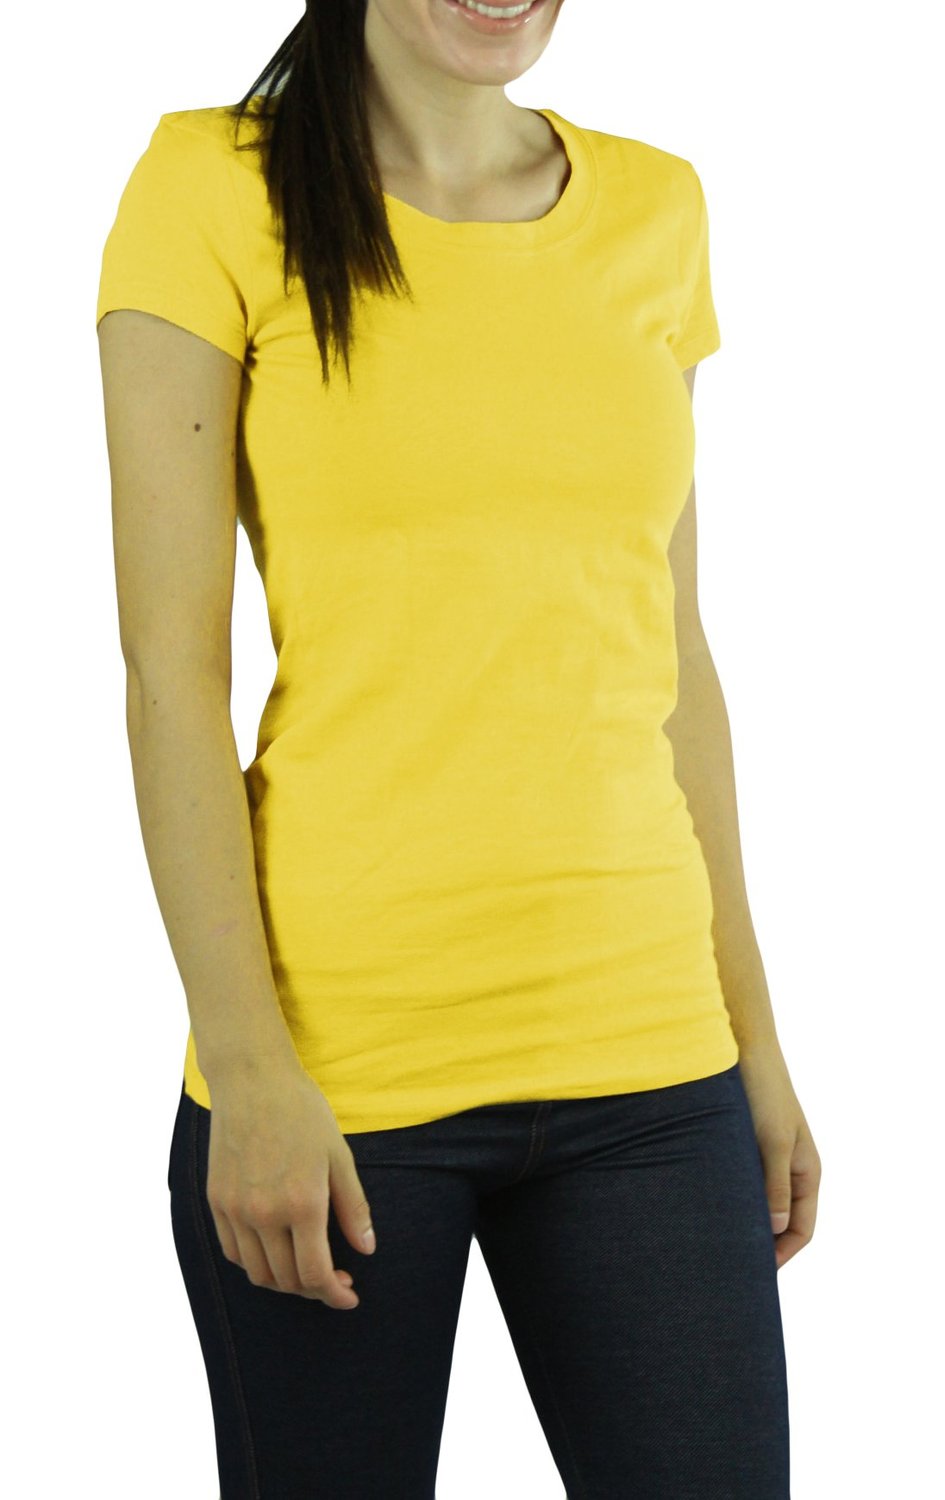 Would you pay $700 for a basic yellow t-shirt? - My Fashion Wants